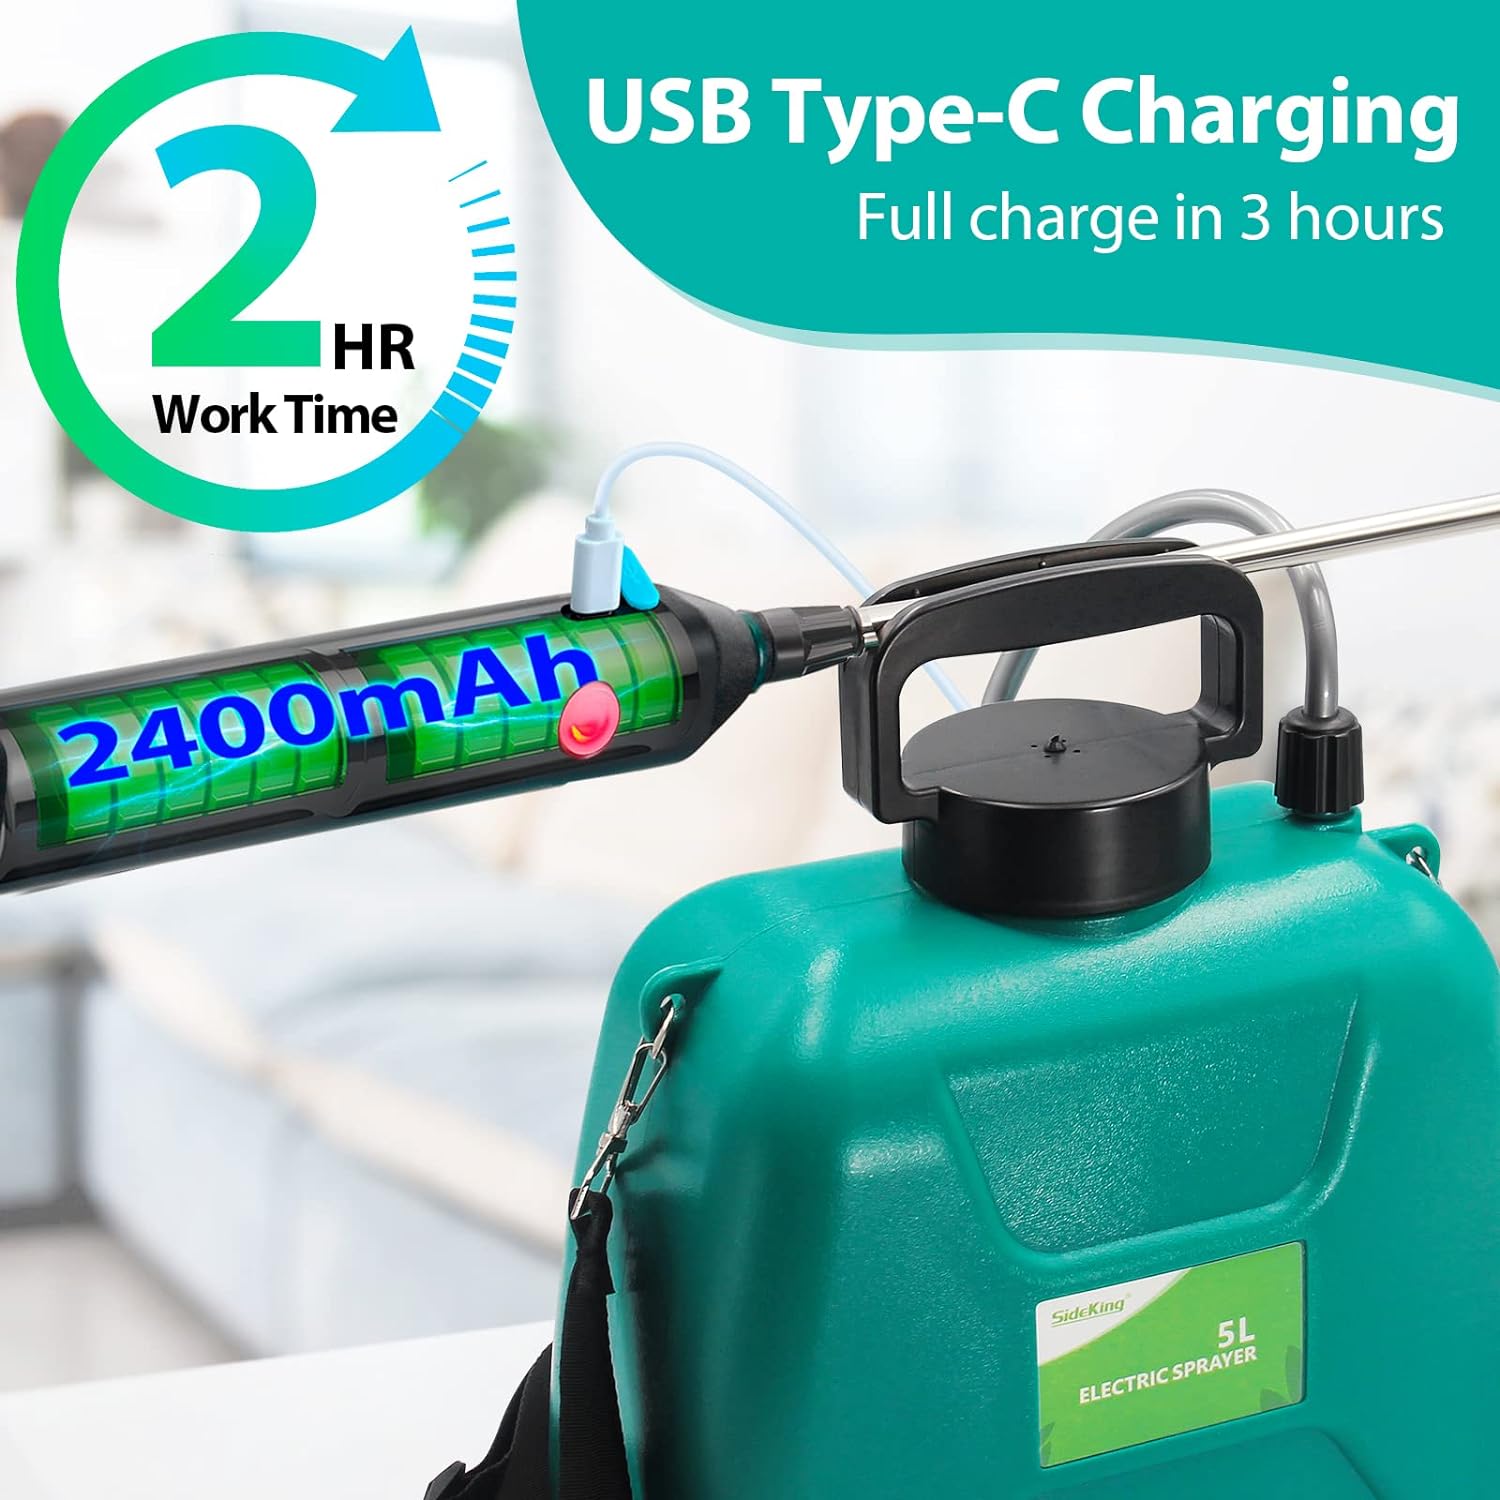 FOGGSTER 5L Battery Powered Sprayer w/ Shoulder Strap | USB Rechargeable Electric Sprayer Handle with 3 Mist Nozzles